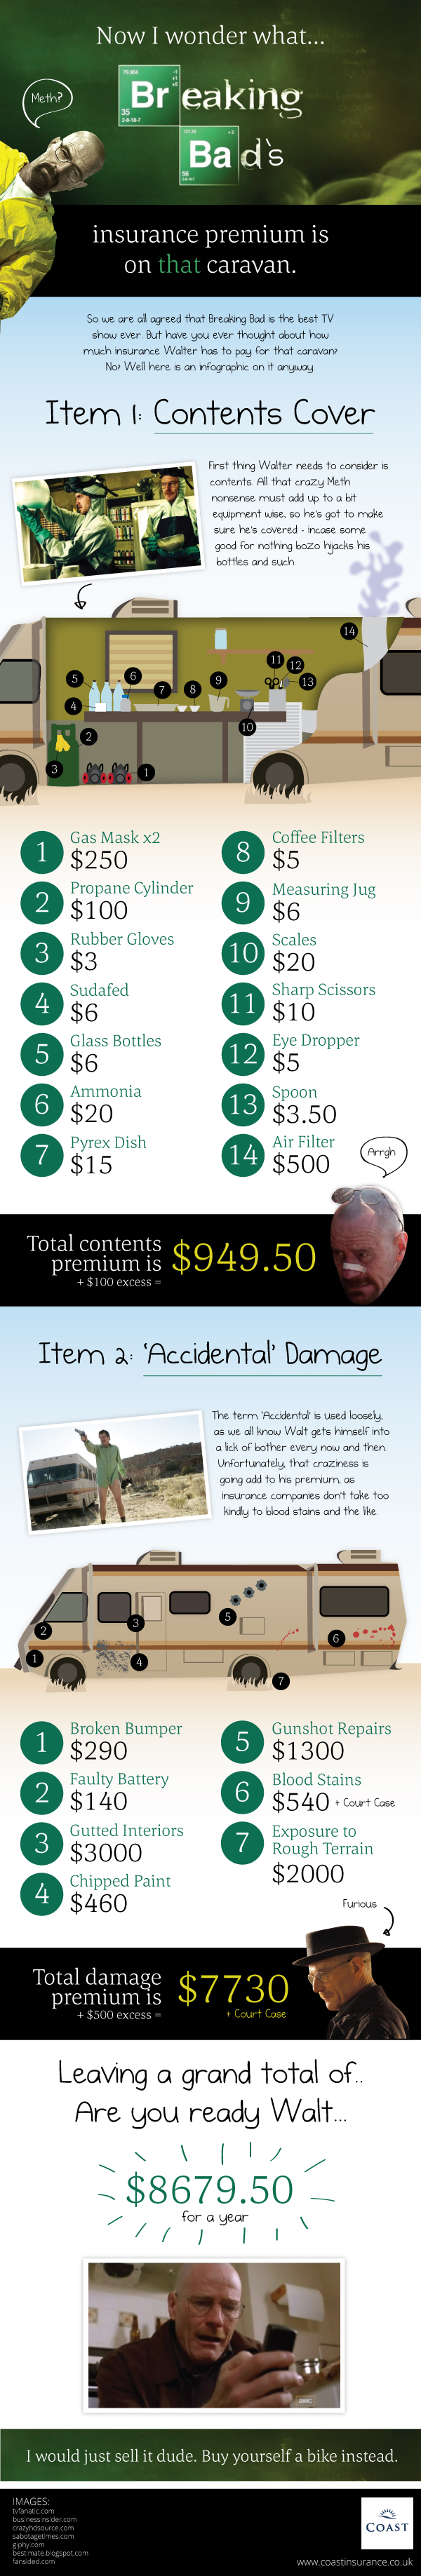 How Much Would Breaking Bad’s Caravan Cost To Insure?